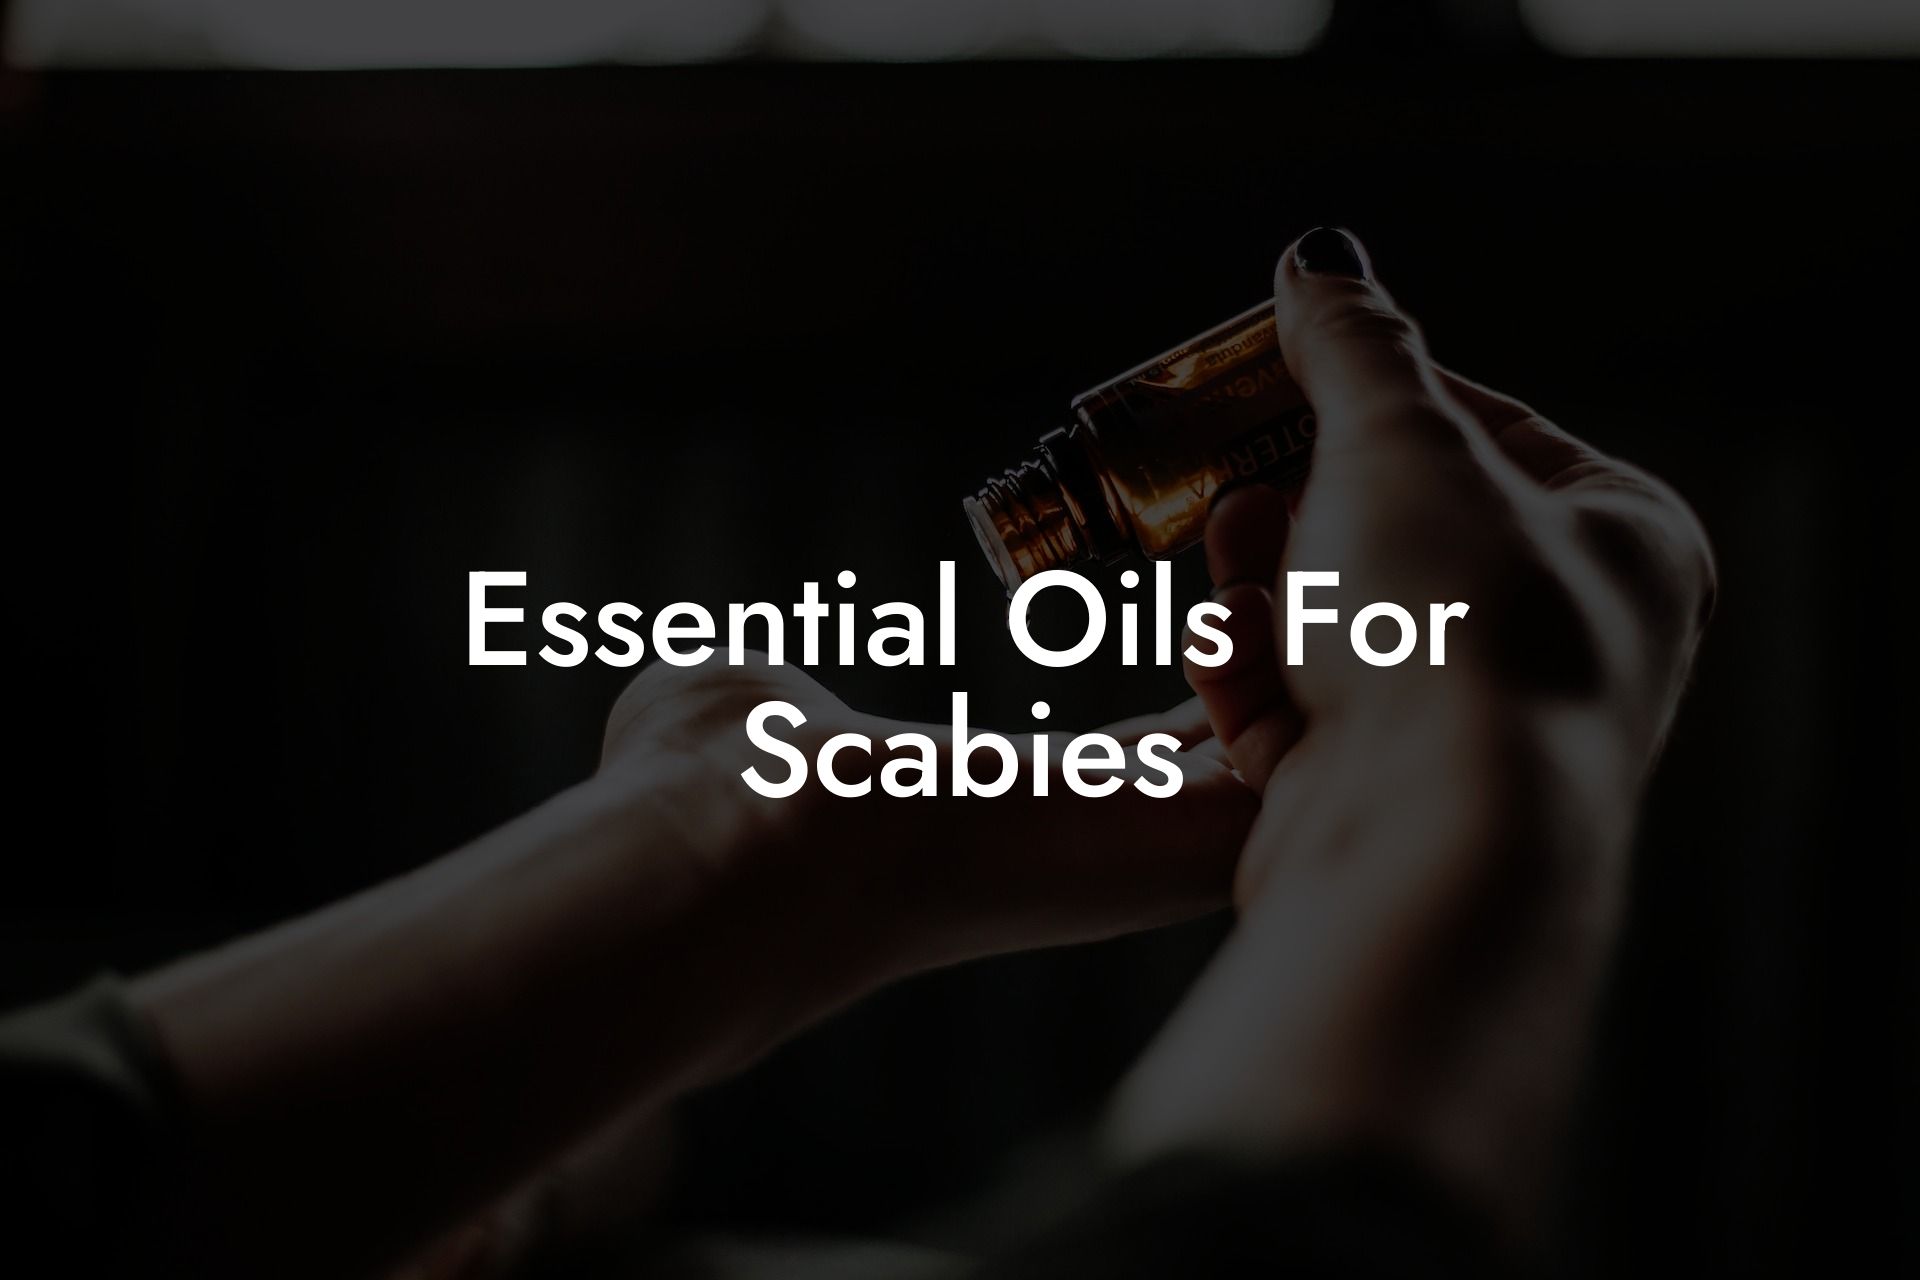 Essential Oils For Scabies